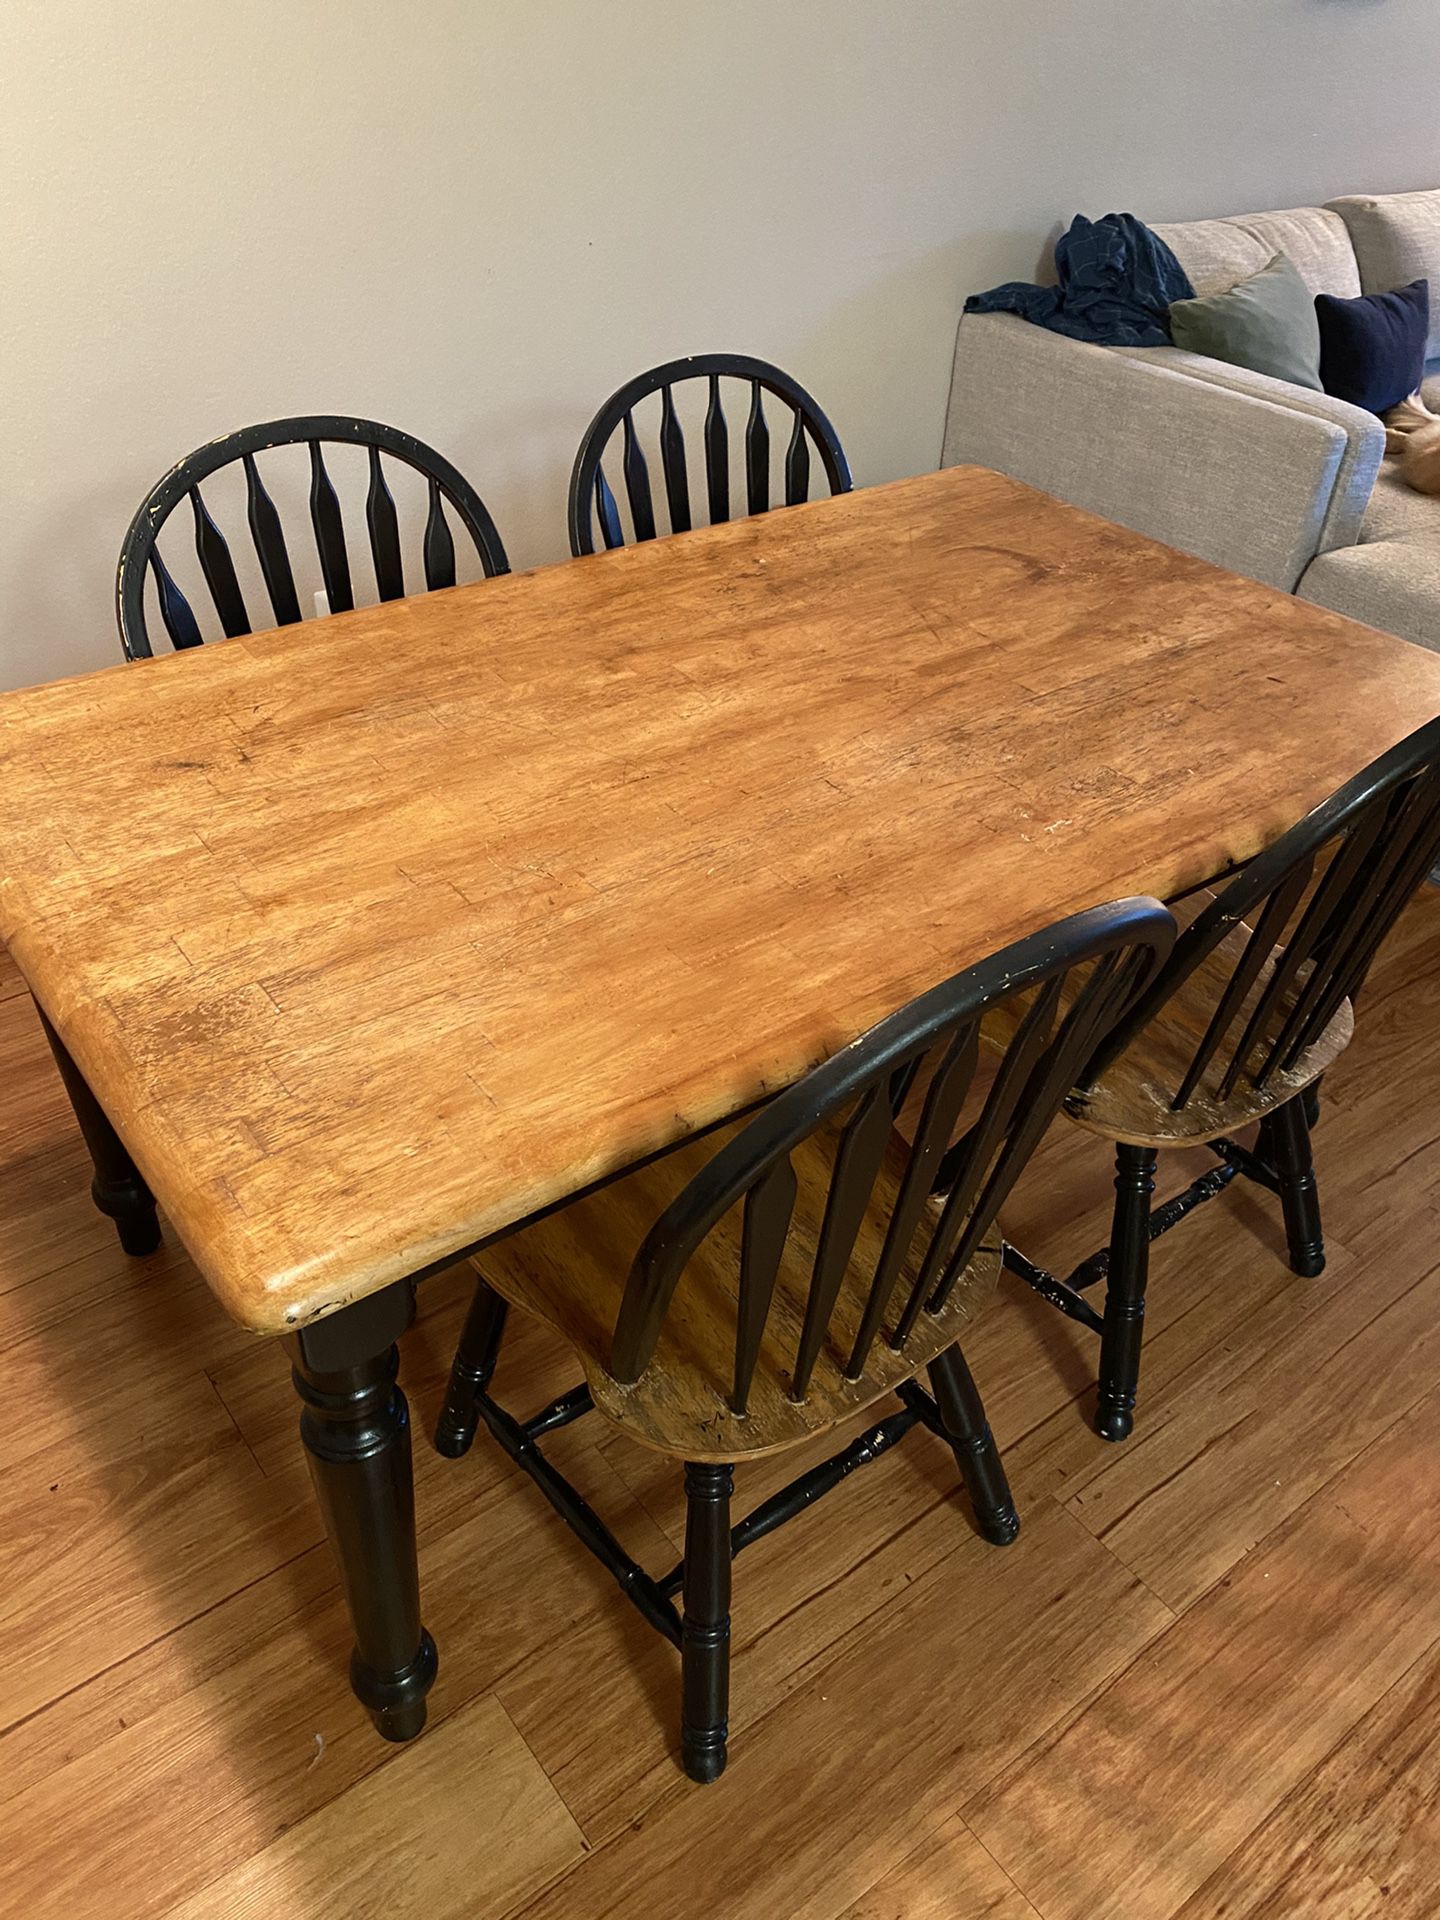 Beautiful Kitchen Table with Matching Chairs Included!